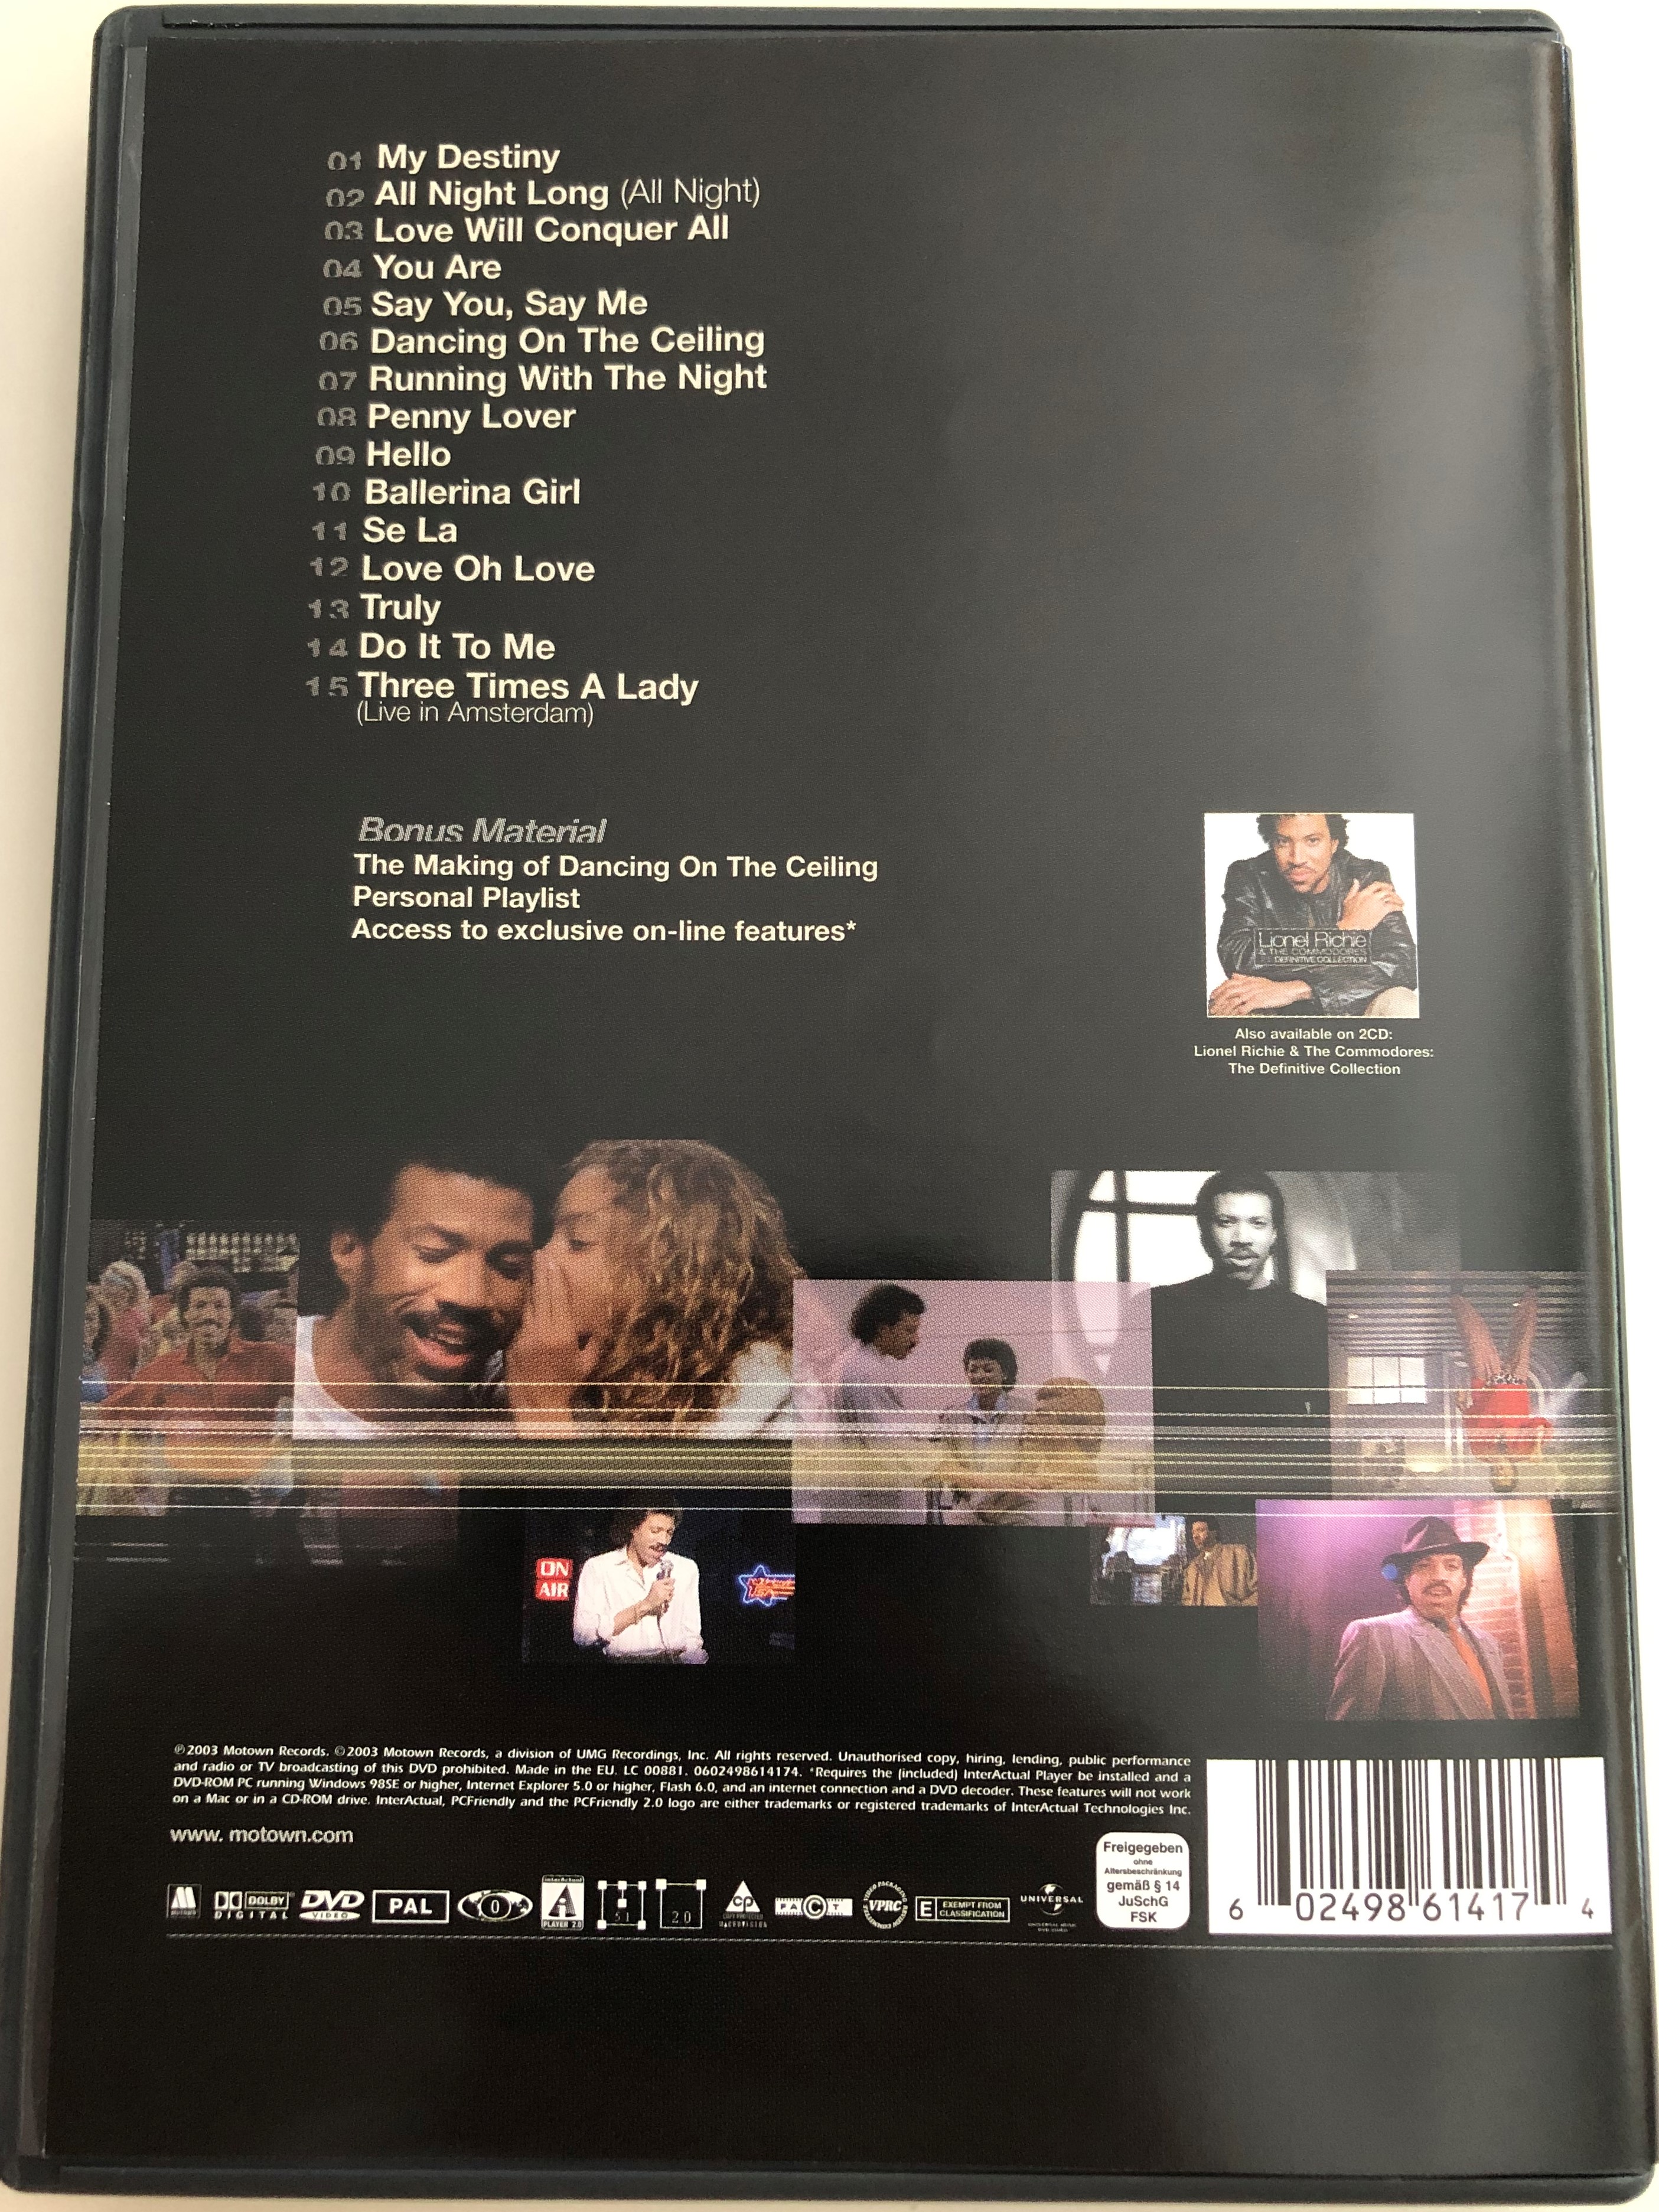 the-lionel-richie-collection-dvd-2003-with-bonus-material-motown-records-3-.jpg